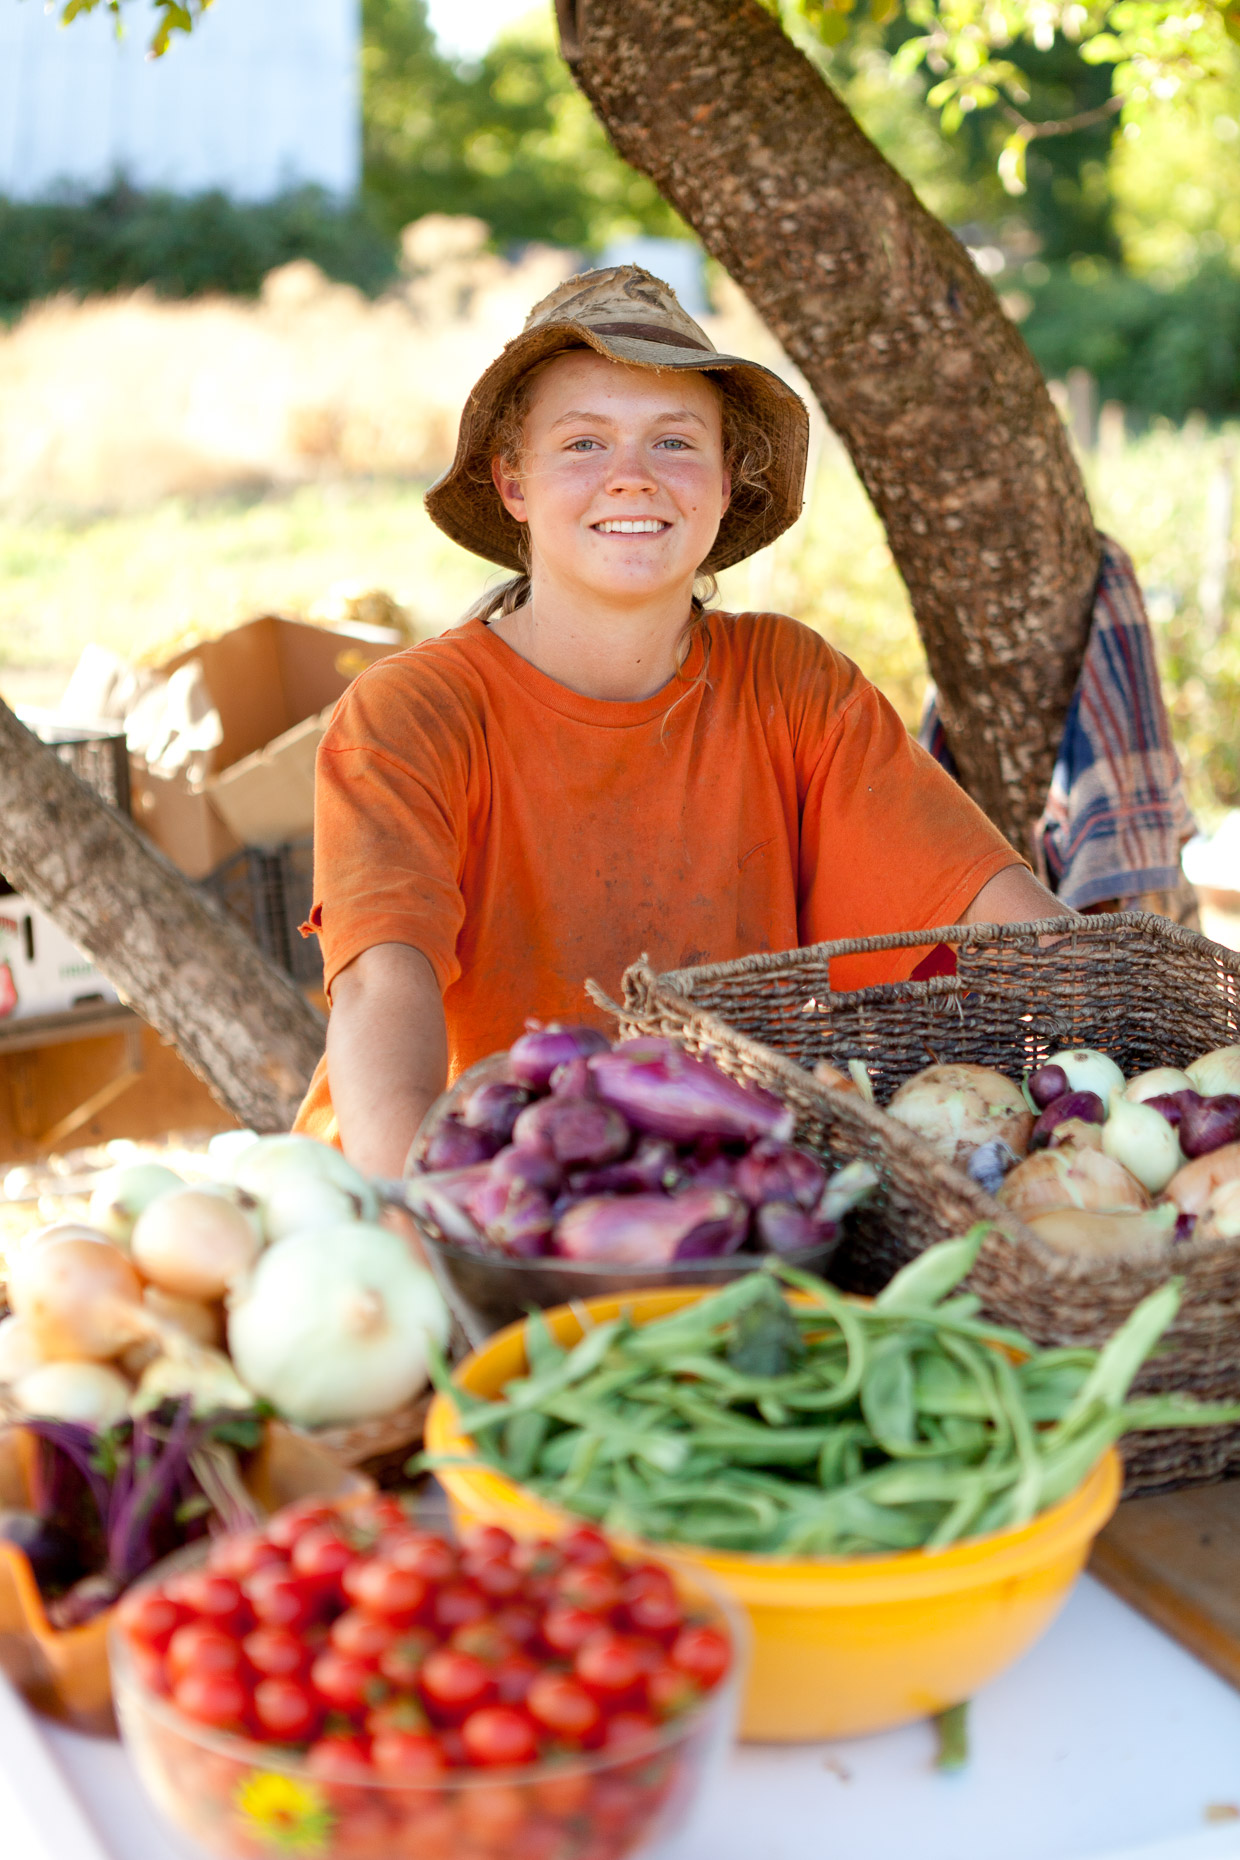 Portrait of girl wearing hat tending roadside produce and fruit stand in Applegate Valley, Oregon by David Zaitz